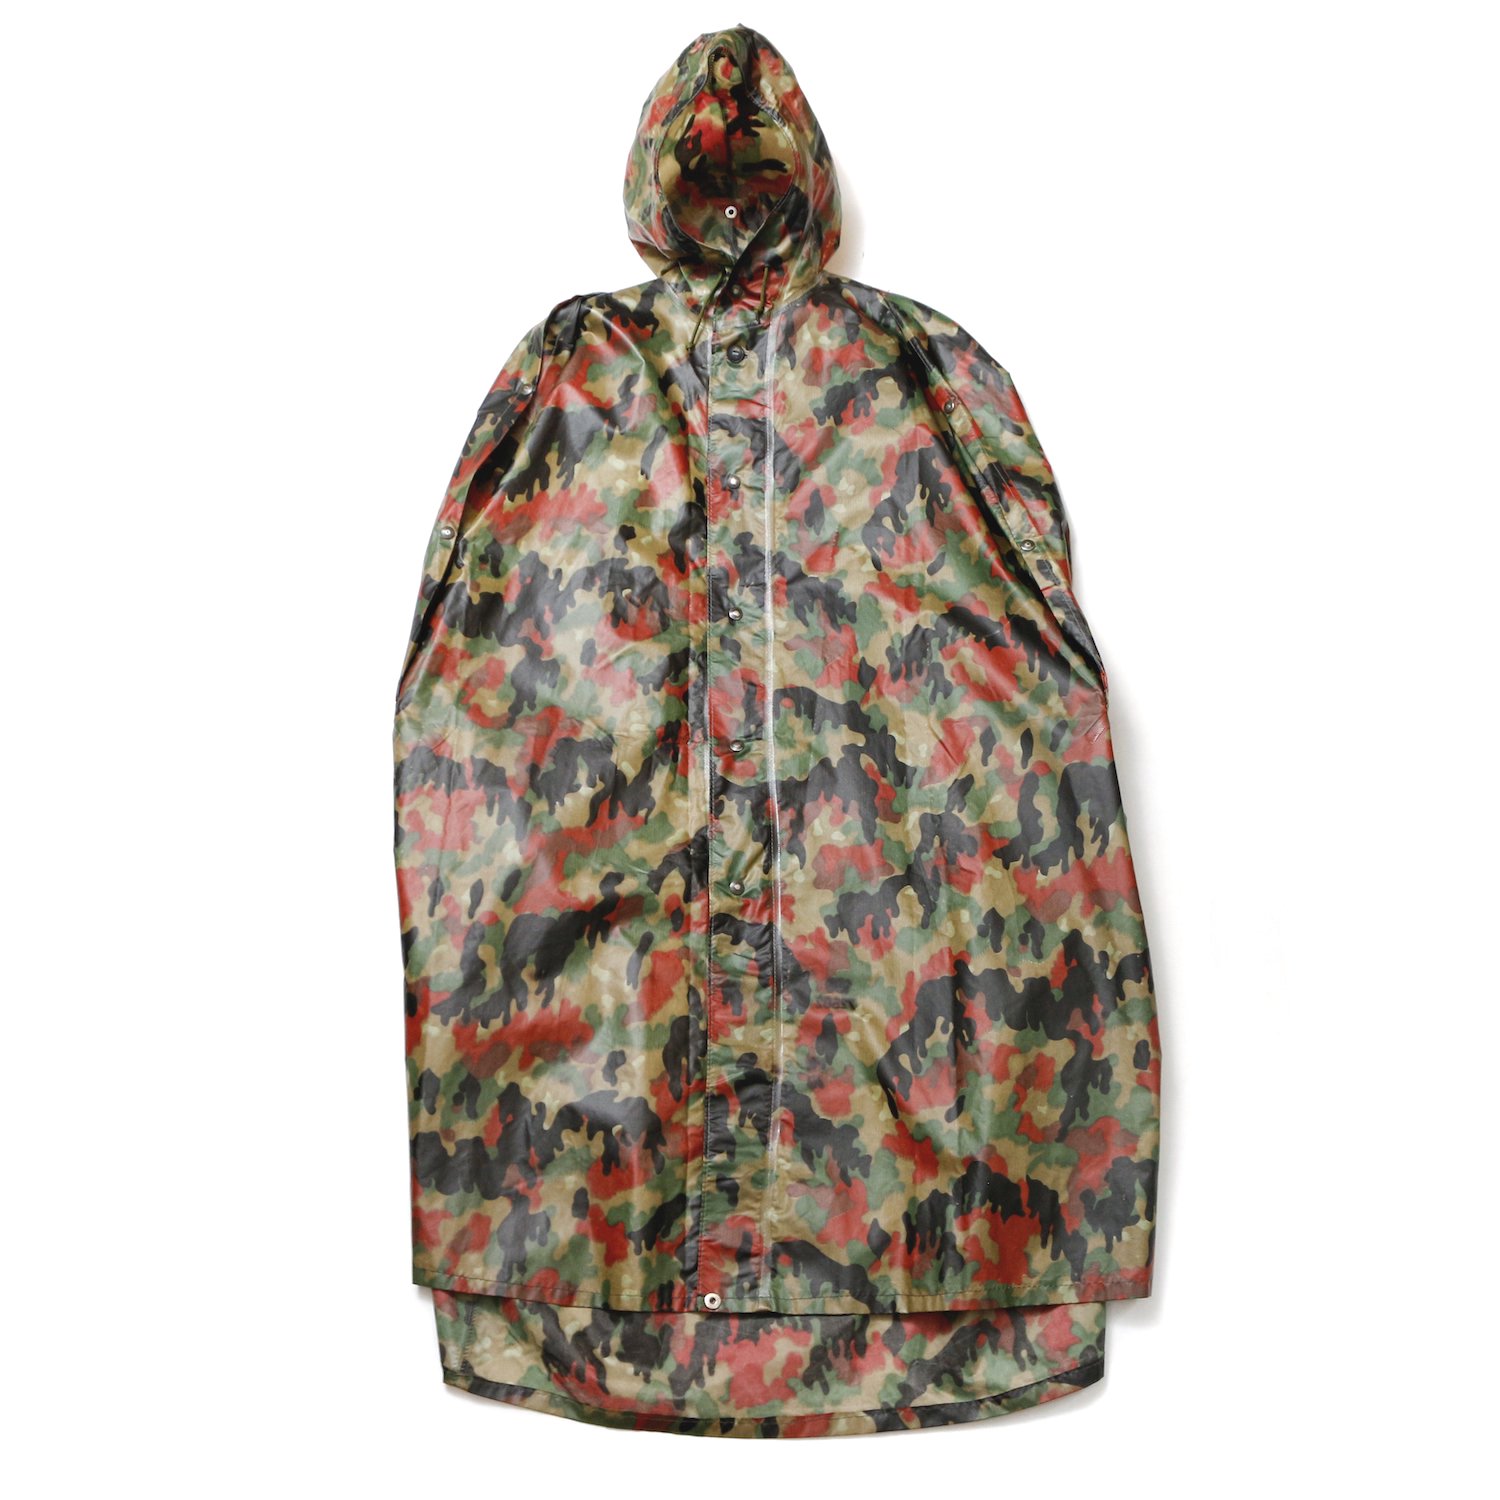 <img class='new_mark_img1' src='https://img.shop-pro.jp/img/new/icons8.gif' style='border:none;display:inline;margin:0px;padding:0px;width:auto;' />MILITARY / Swiss Army Rain Poncho